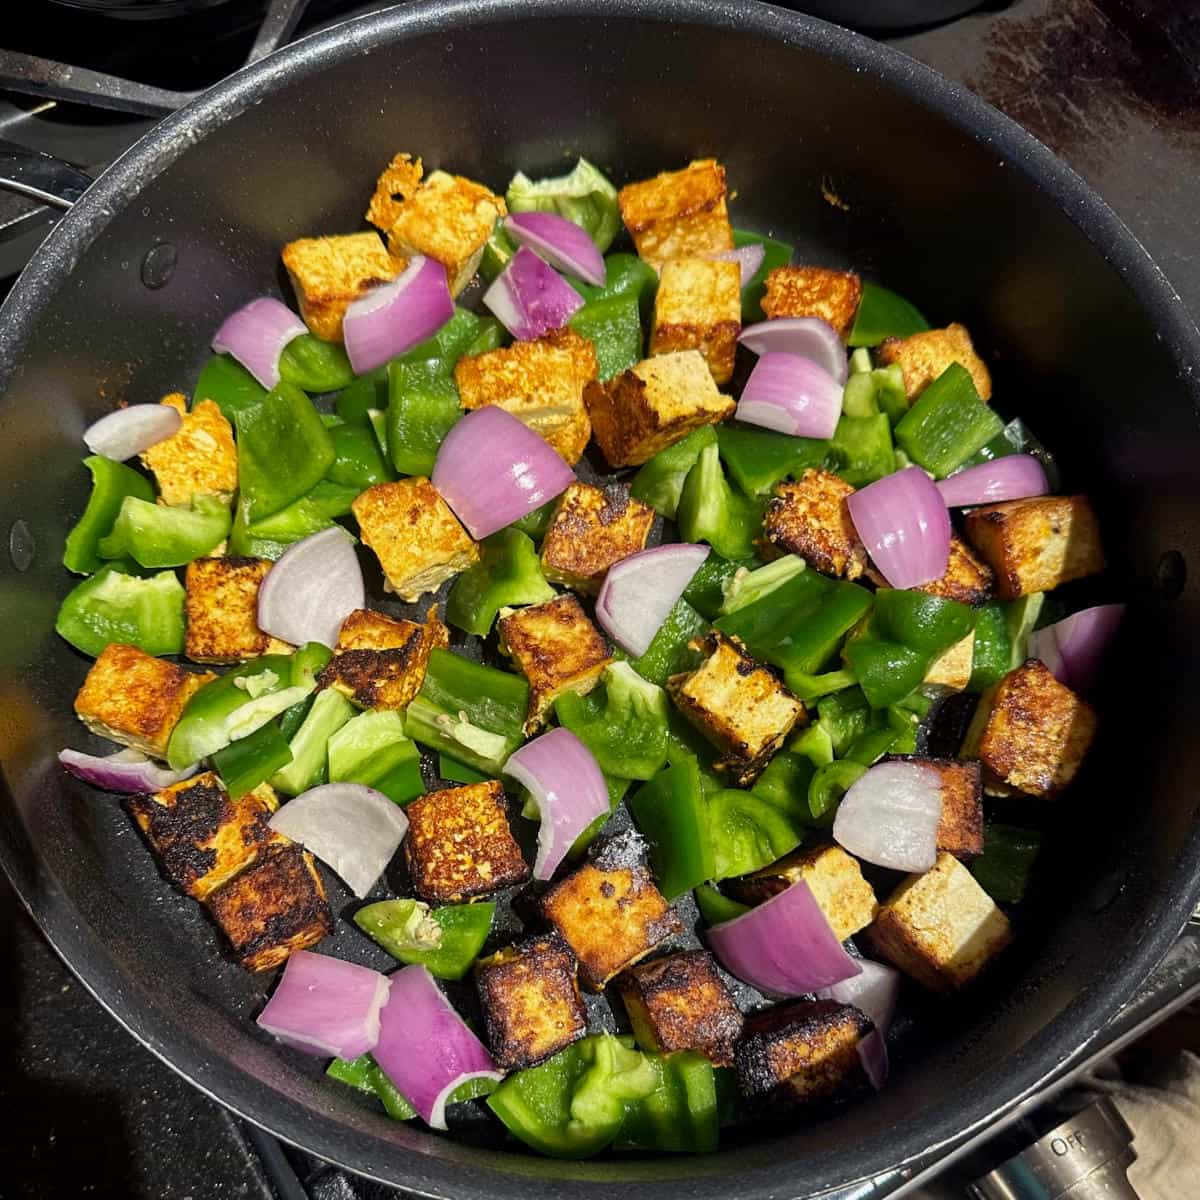 Bell peppers and tofu cubes in saute pan.